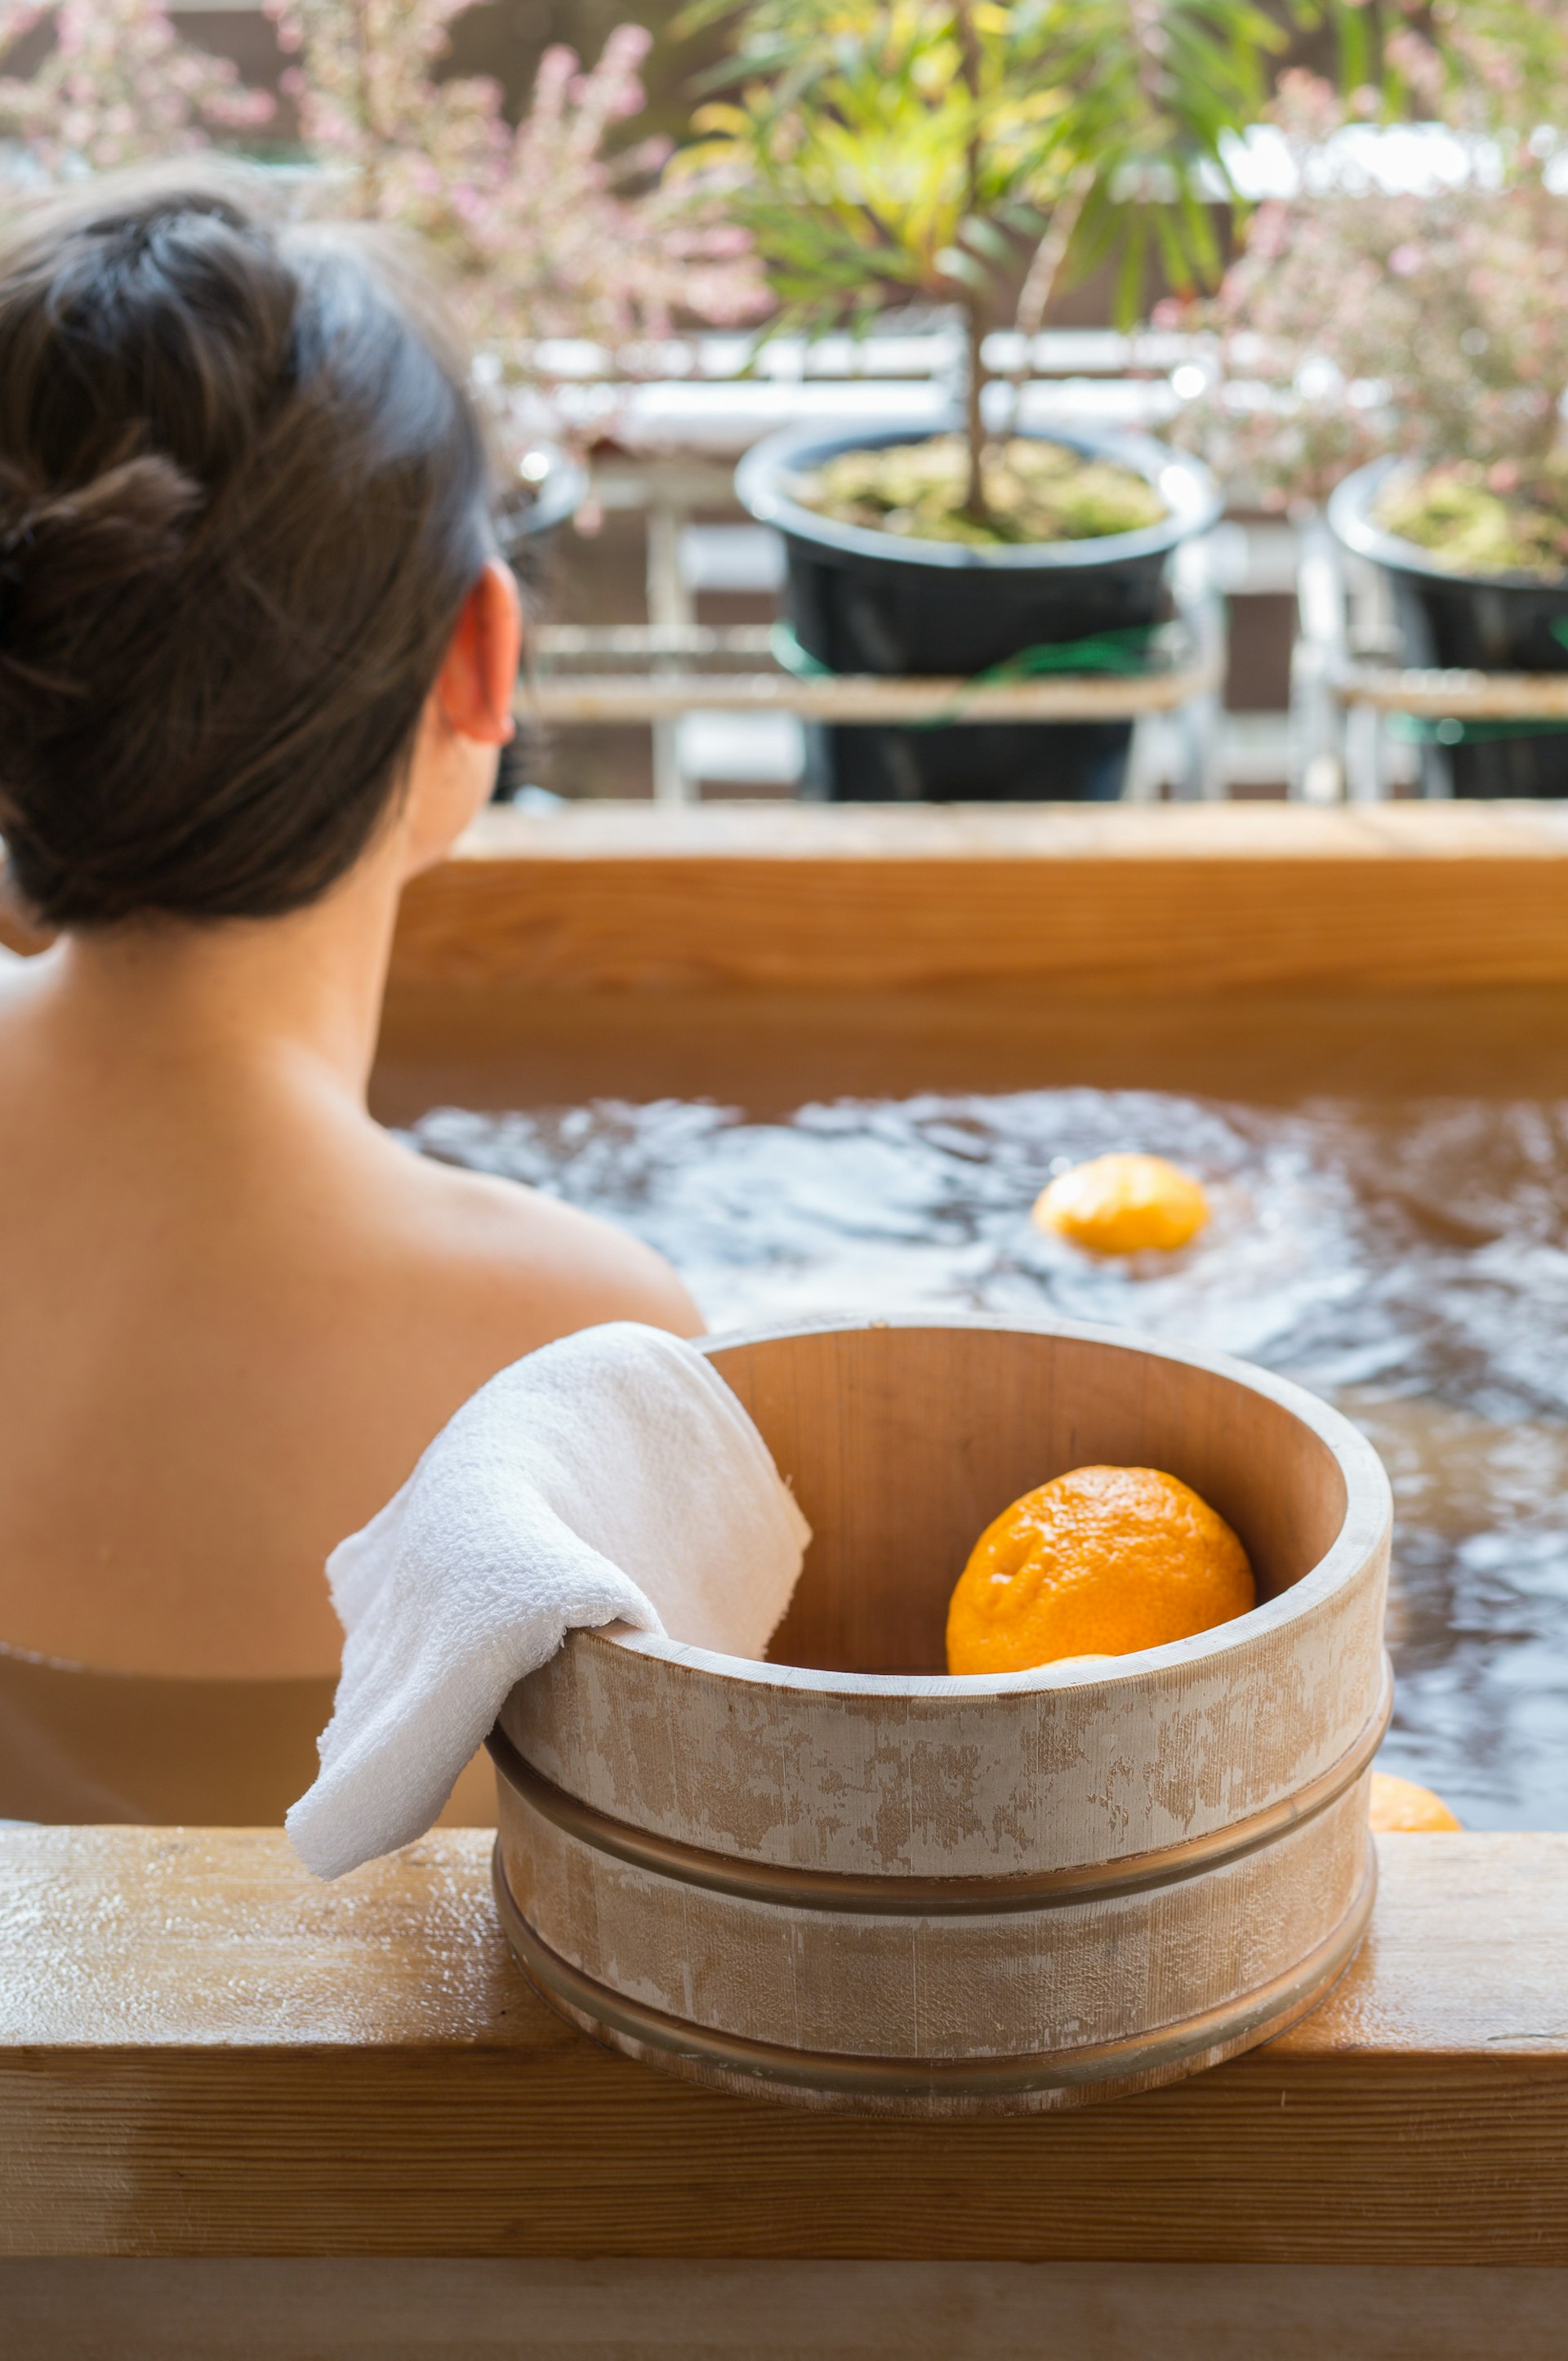 Bath bucket with yuzu during traditional bathing at Japanese onsen